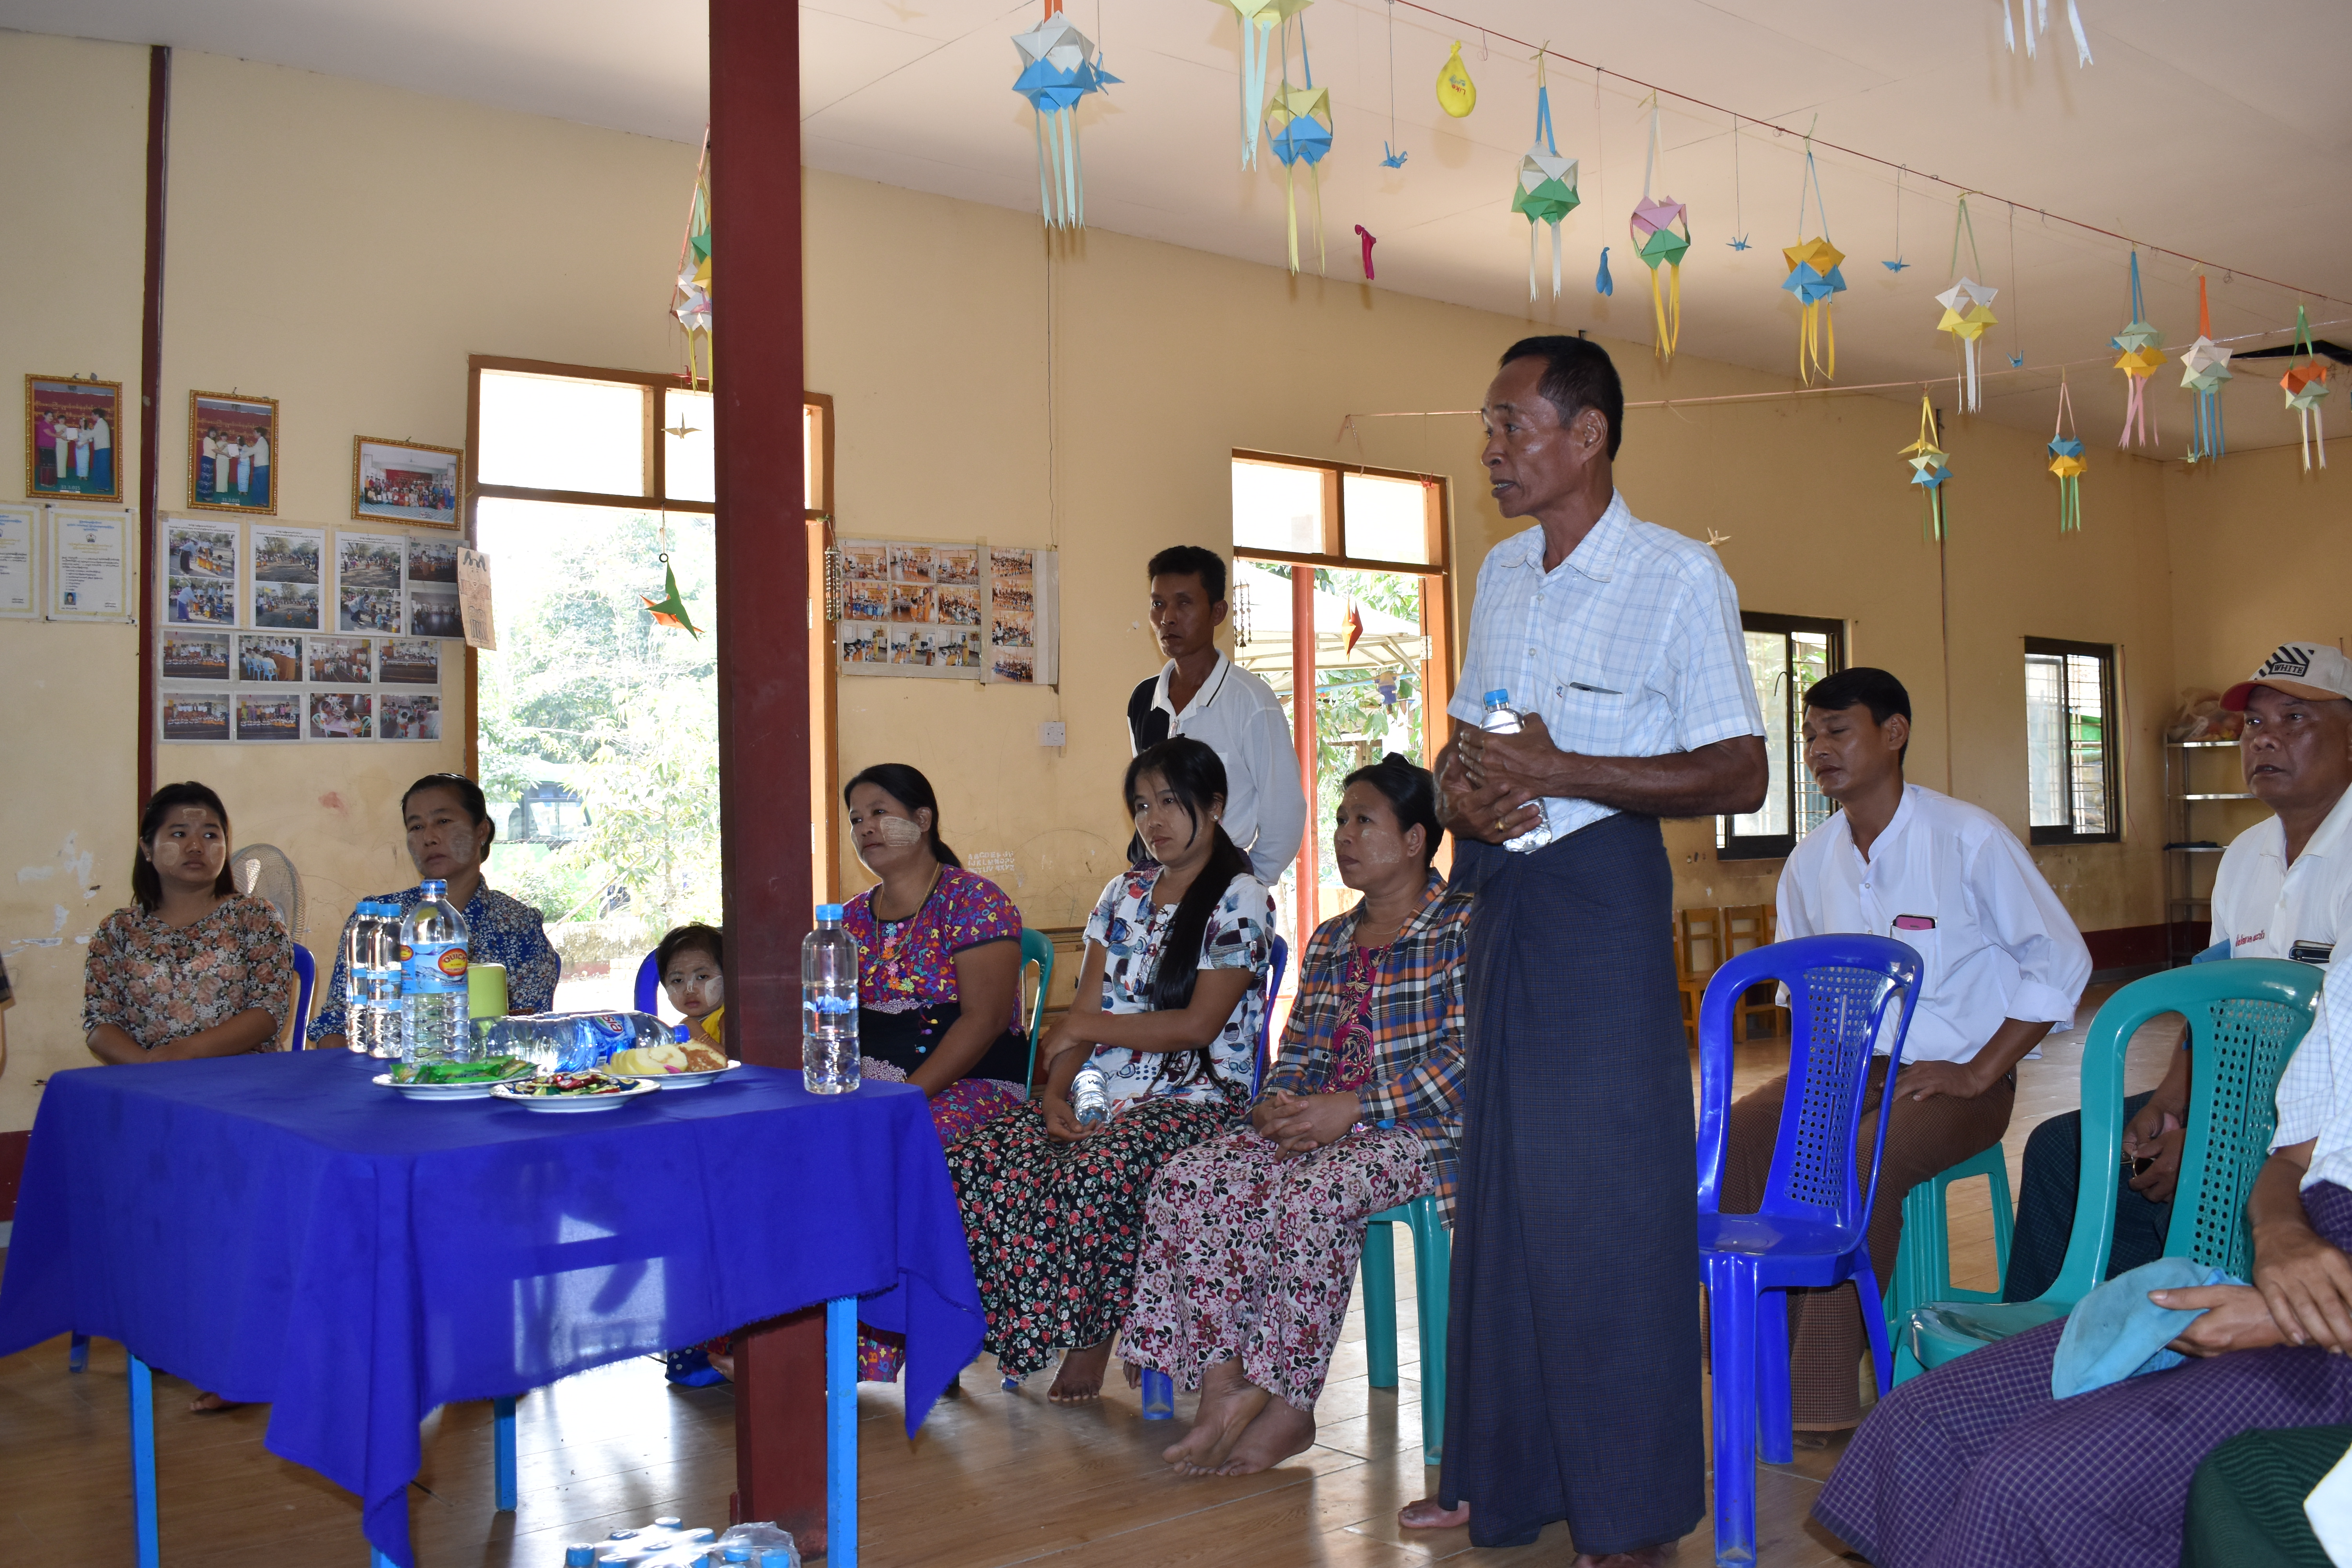 In collaboration with FAO, the Myanmar Pig Partnership is working on incorporating effective biosecurity messages into its farmer training initiatives in the Yangon region in preparation for an outbreak